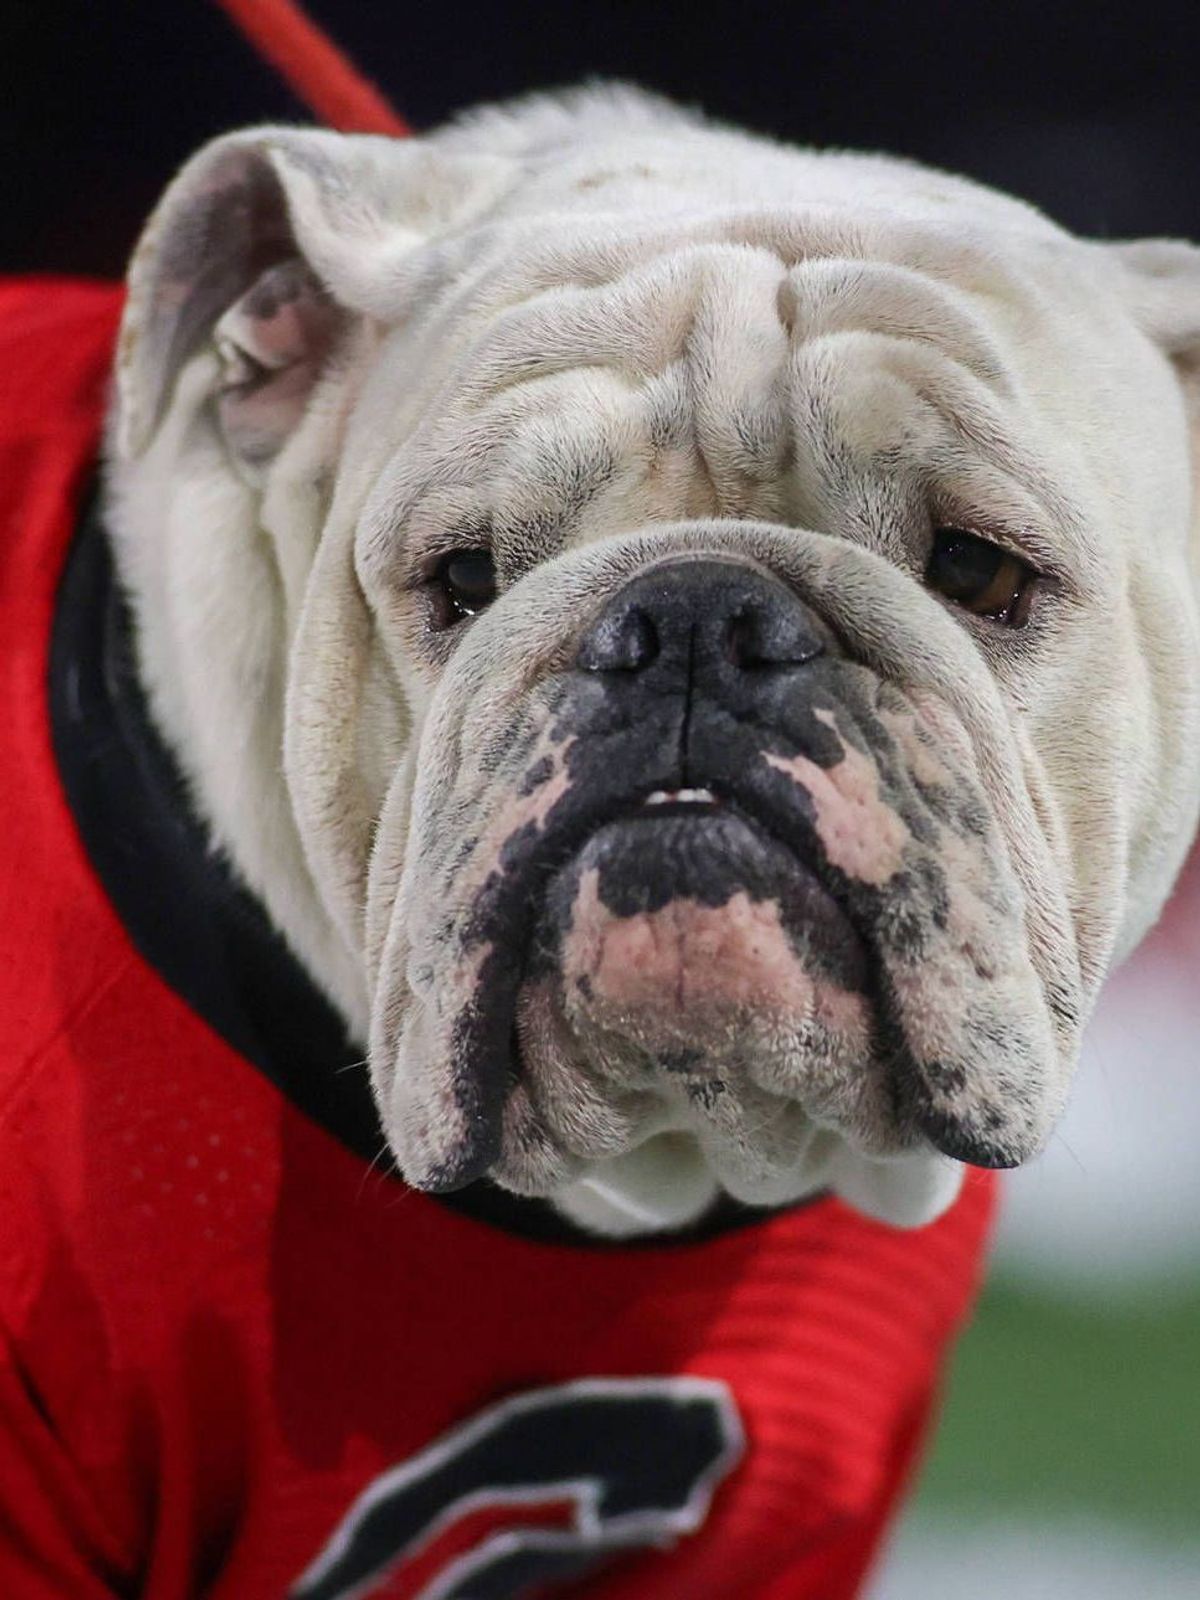 NCAA, College League, USA Football: Georgia at Georgia Tech Nov 25, 2023; Atlanta, Georgia, USA; Georgia Bulldogs mascot Uga on the sideline before a game against the Georgia Tech Yellow Jackets at...